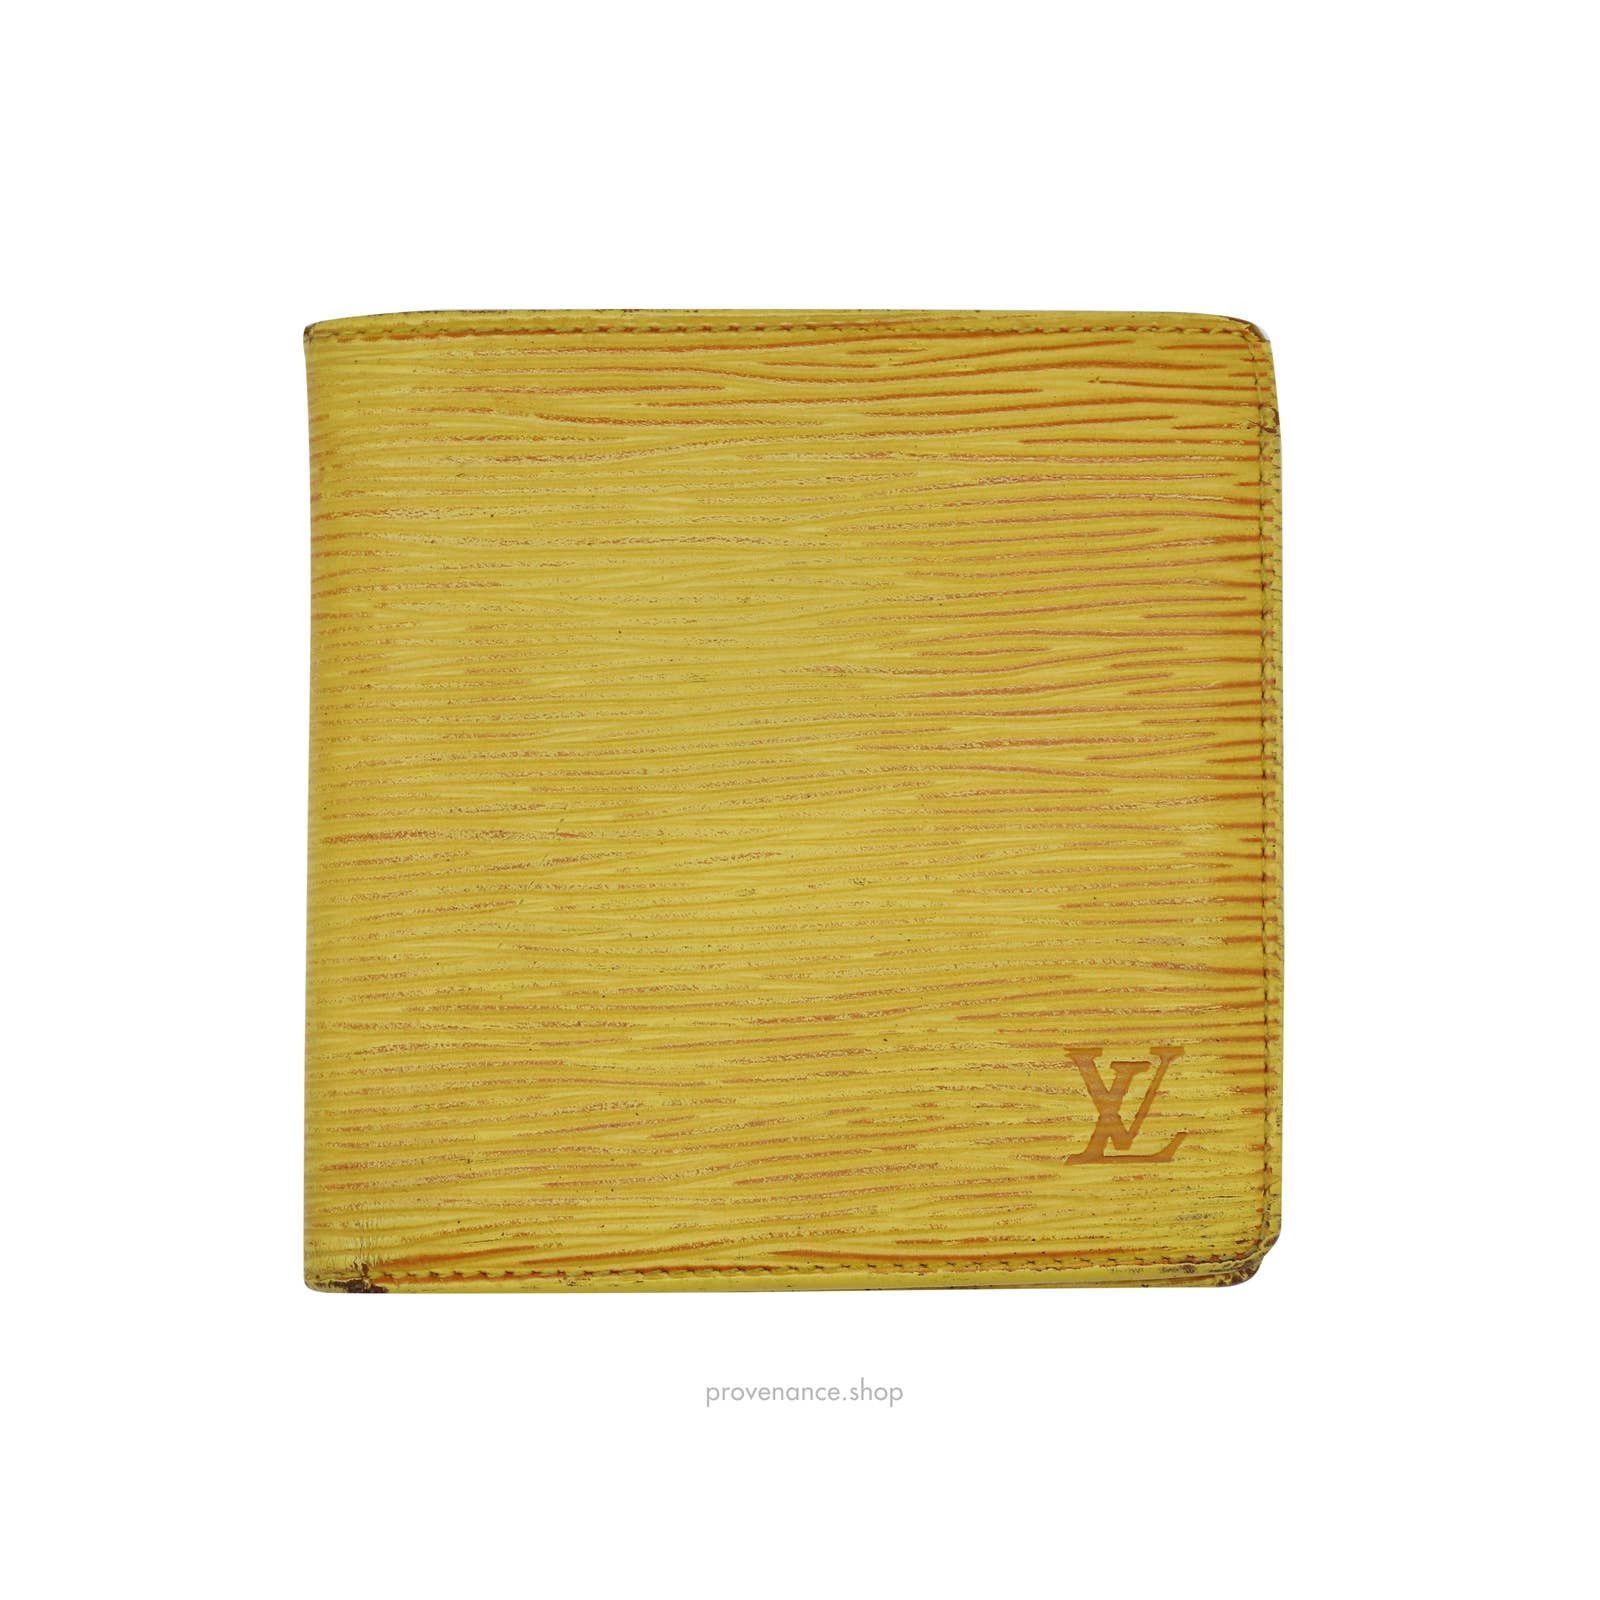 Louis Vuitton Tassil Yellow Epi Leather Marco Bifold Compact Wallet